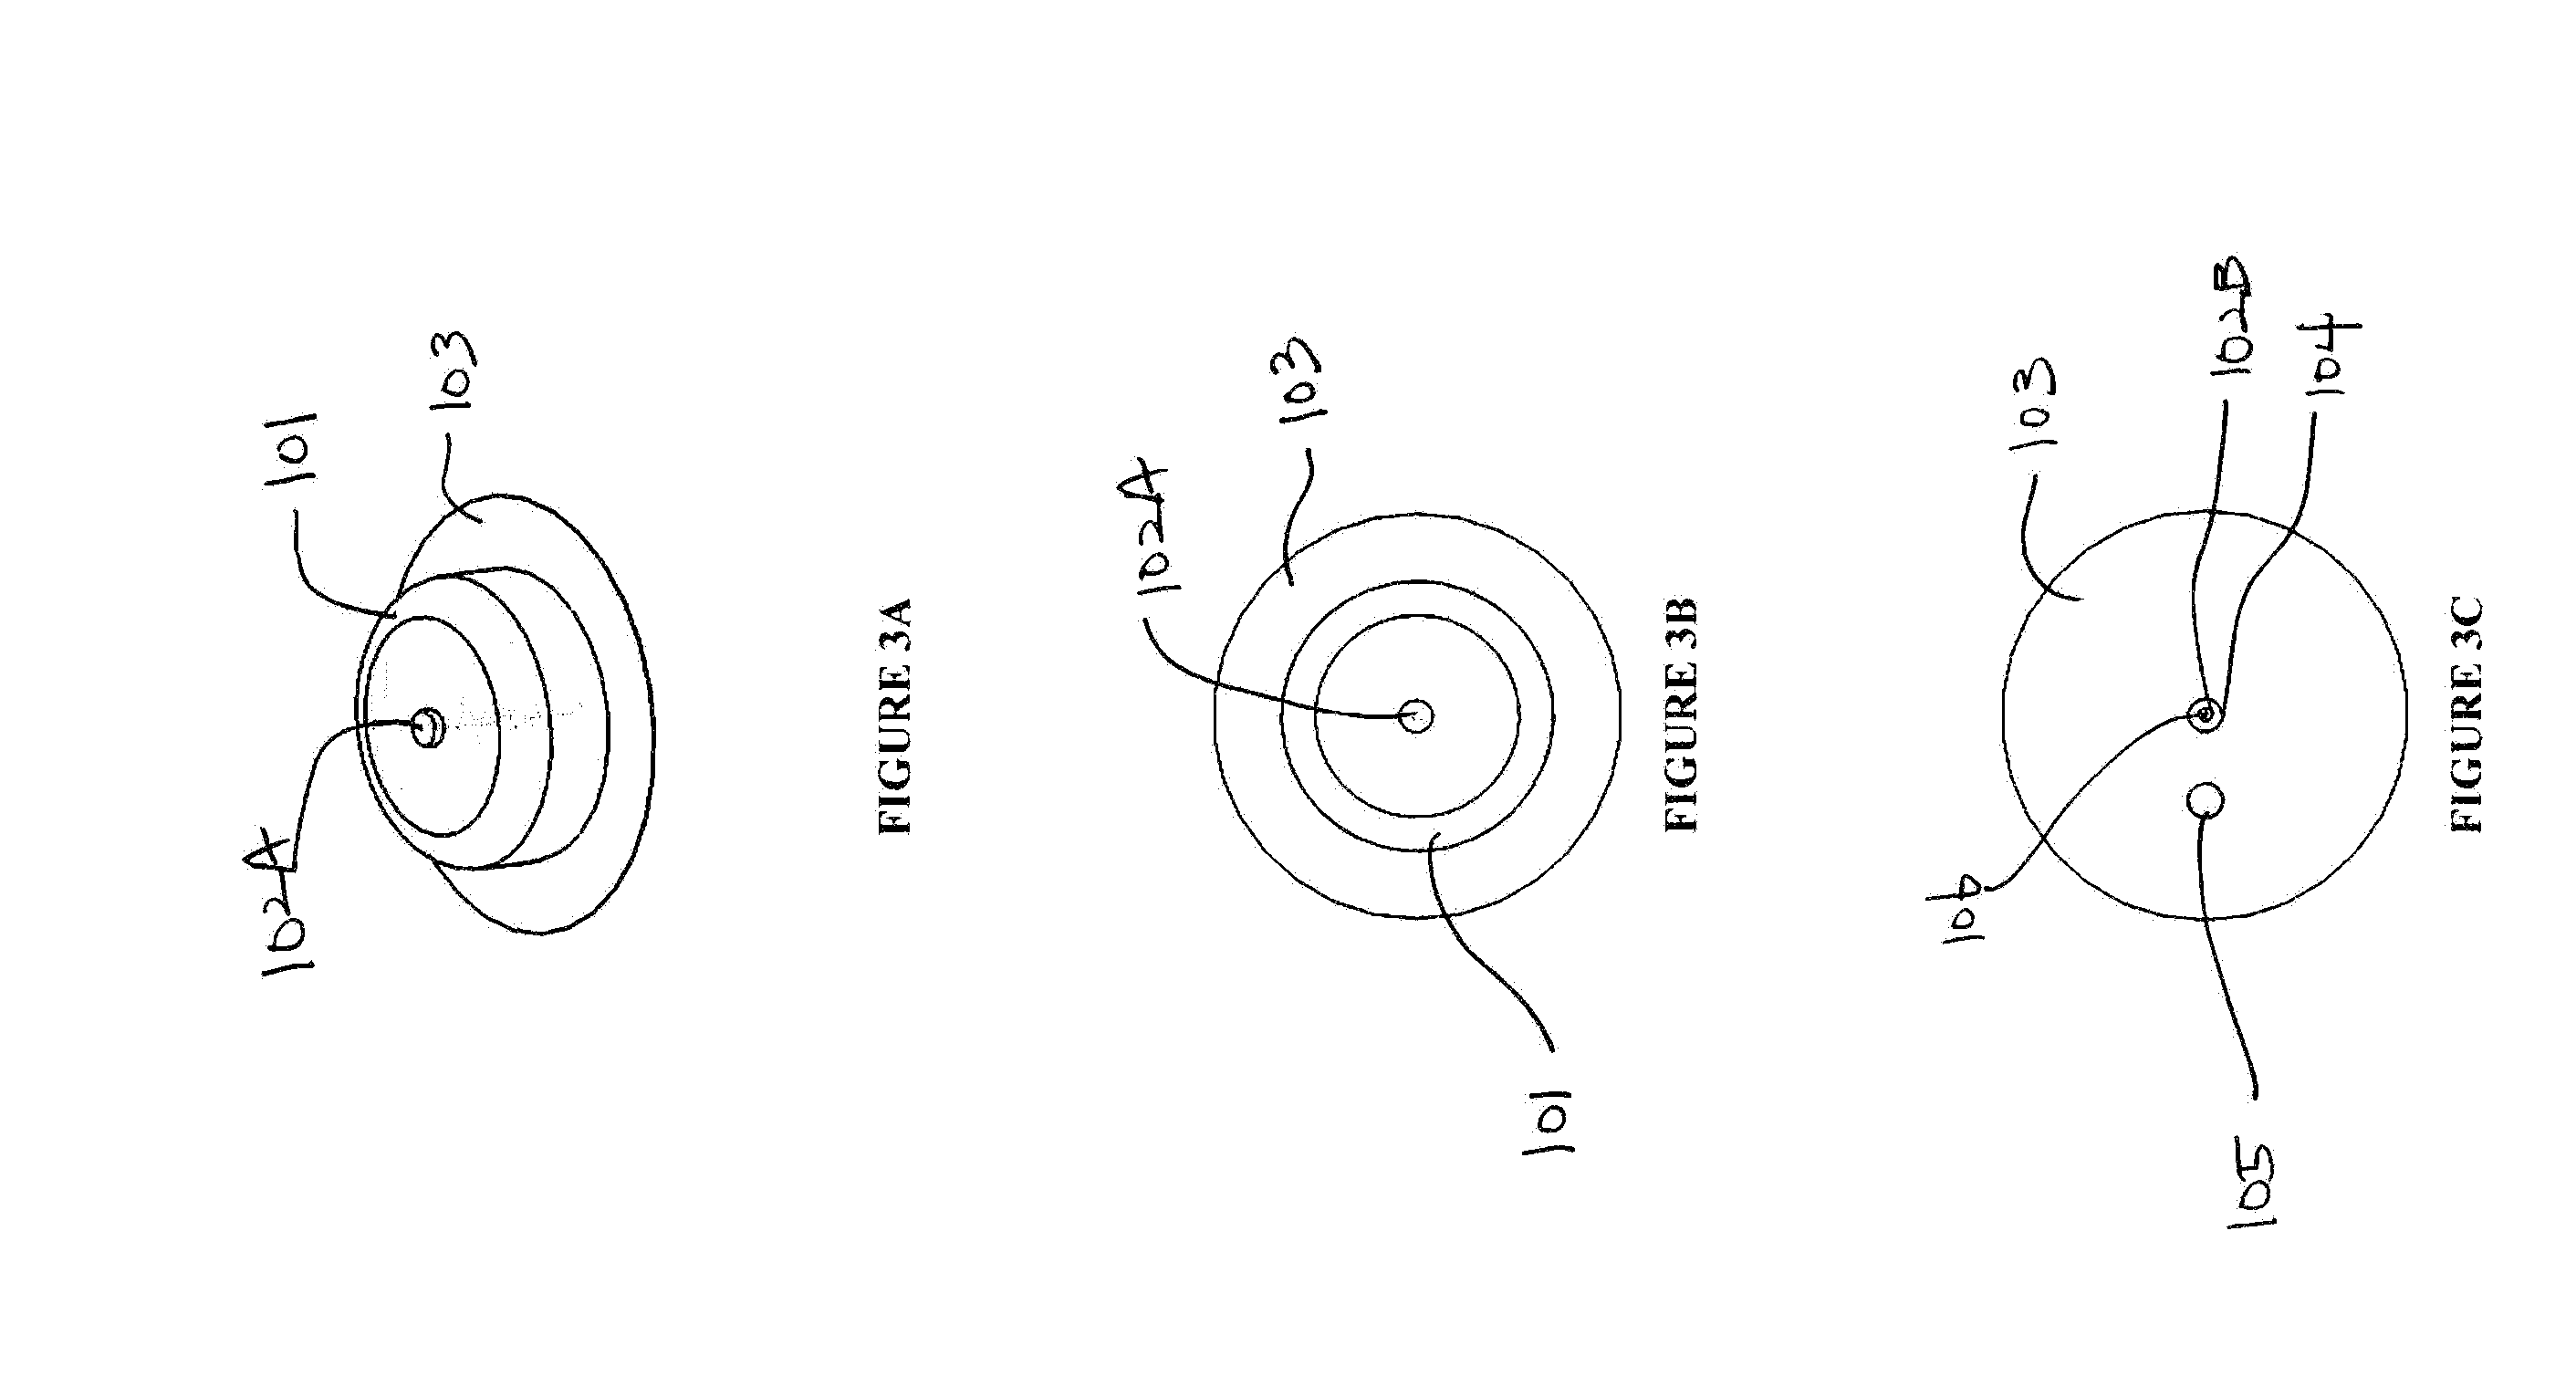 Method and System for Providing An Integrated Analyte Sensor Insertion Device and Data Processing Unit